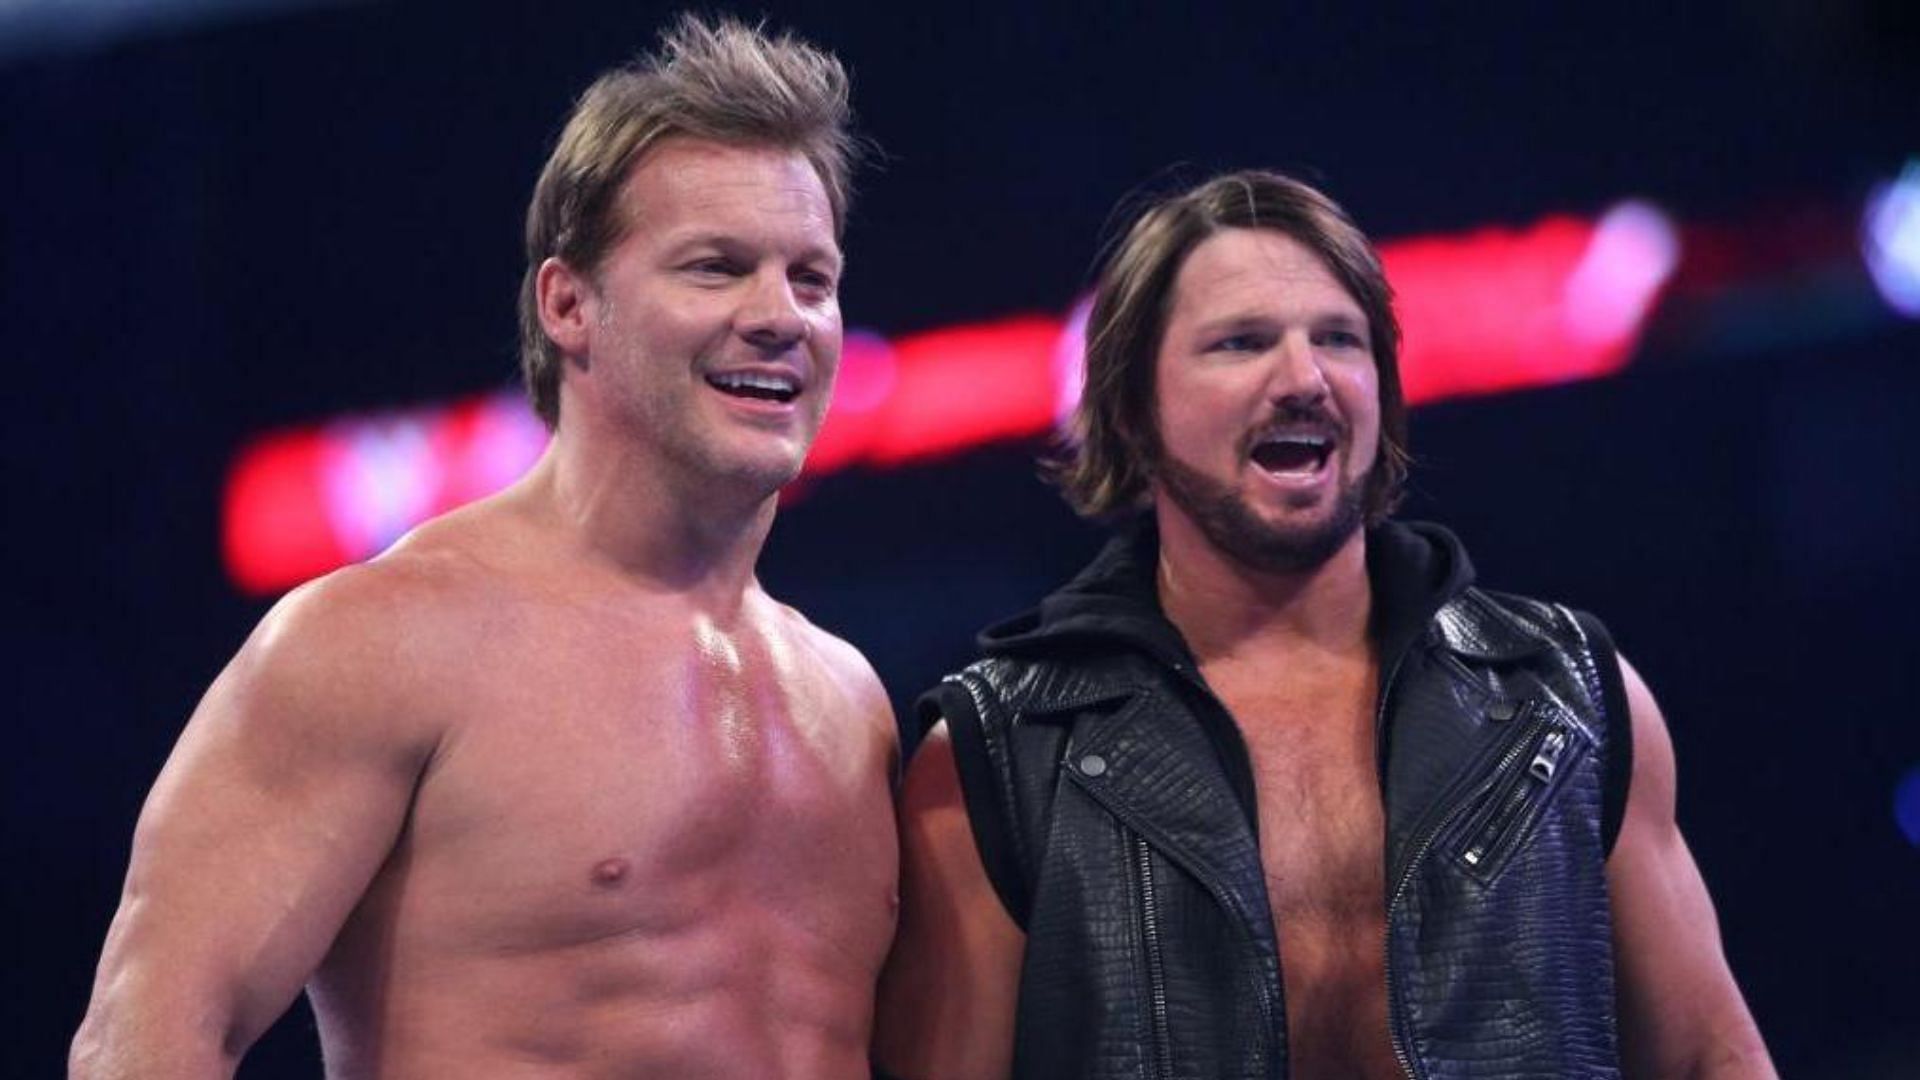 Chris Jericho and AJ Styles&#039; Road to WrestleMania in 2016 involved a brief union